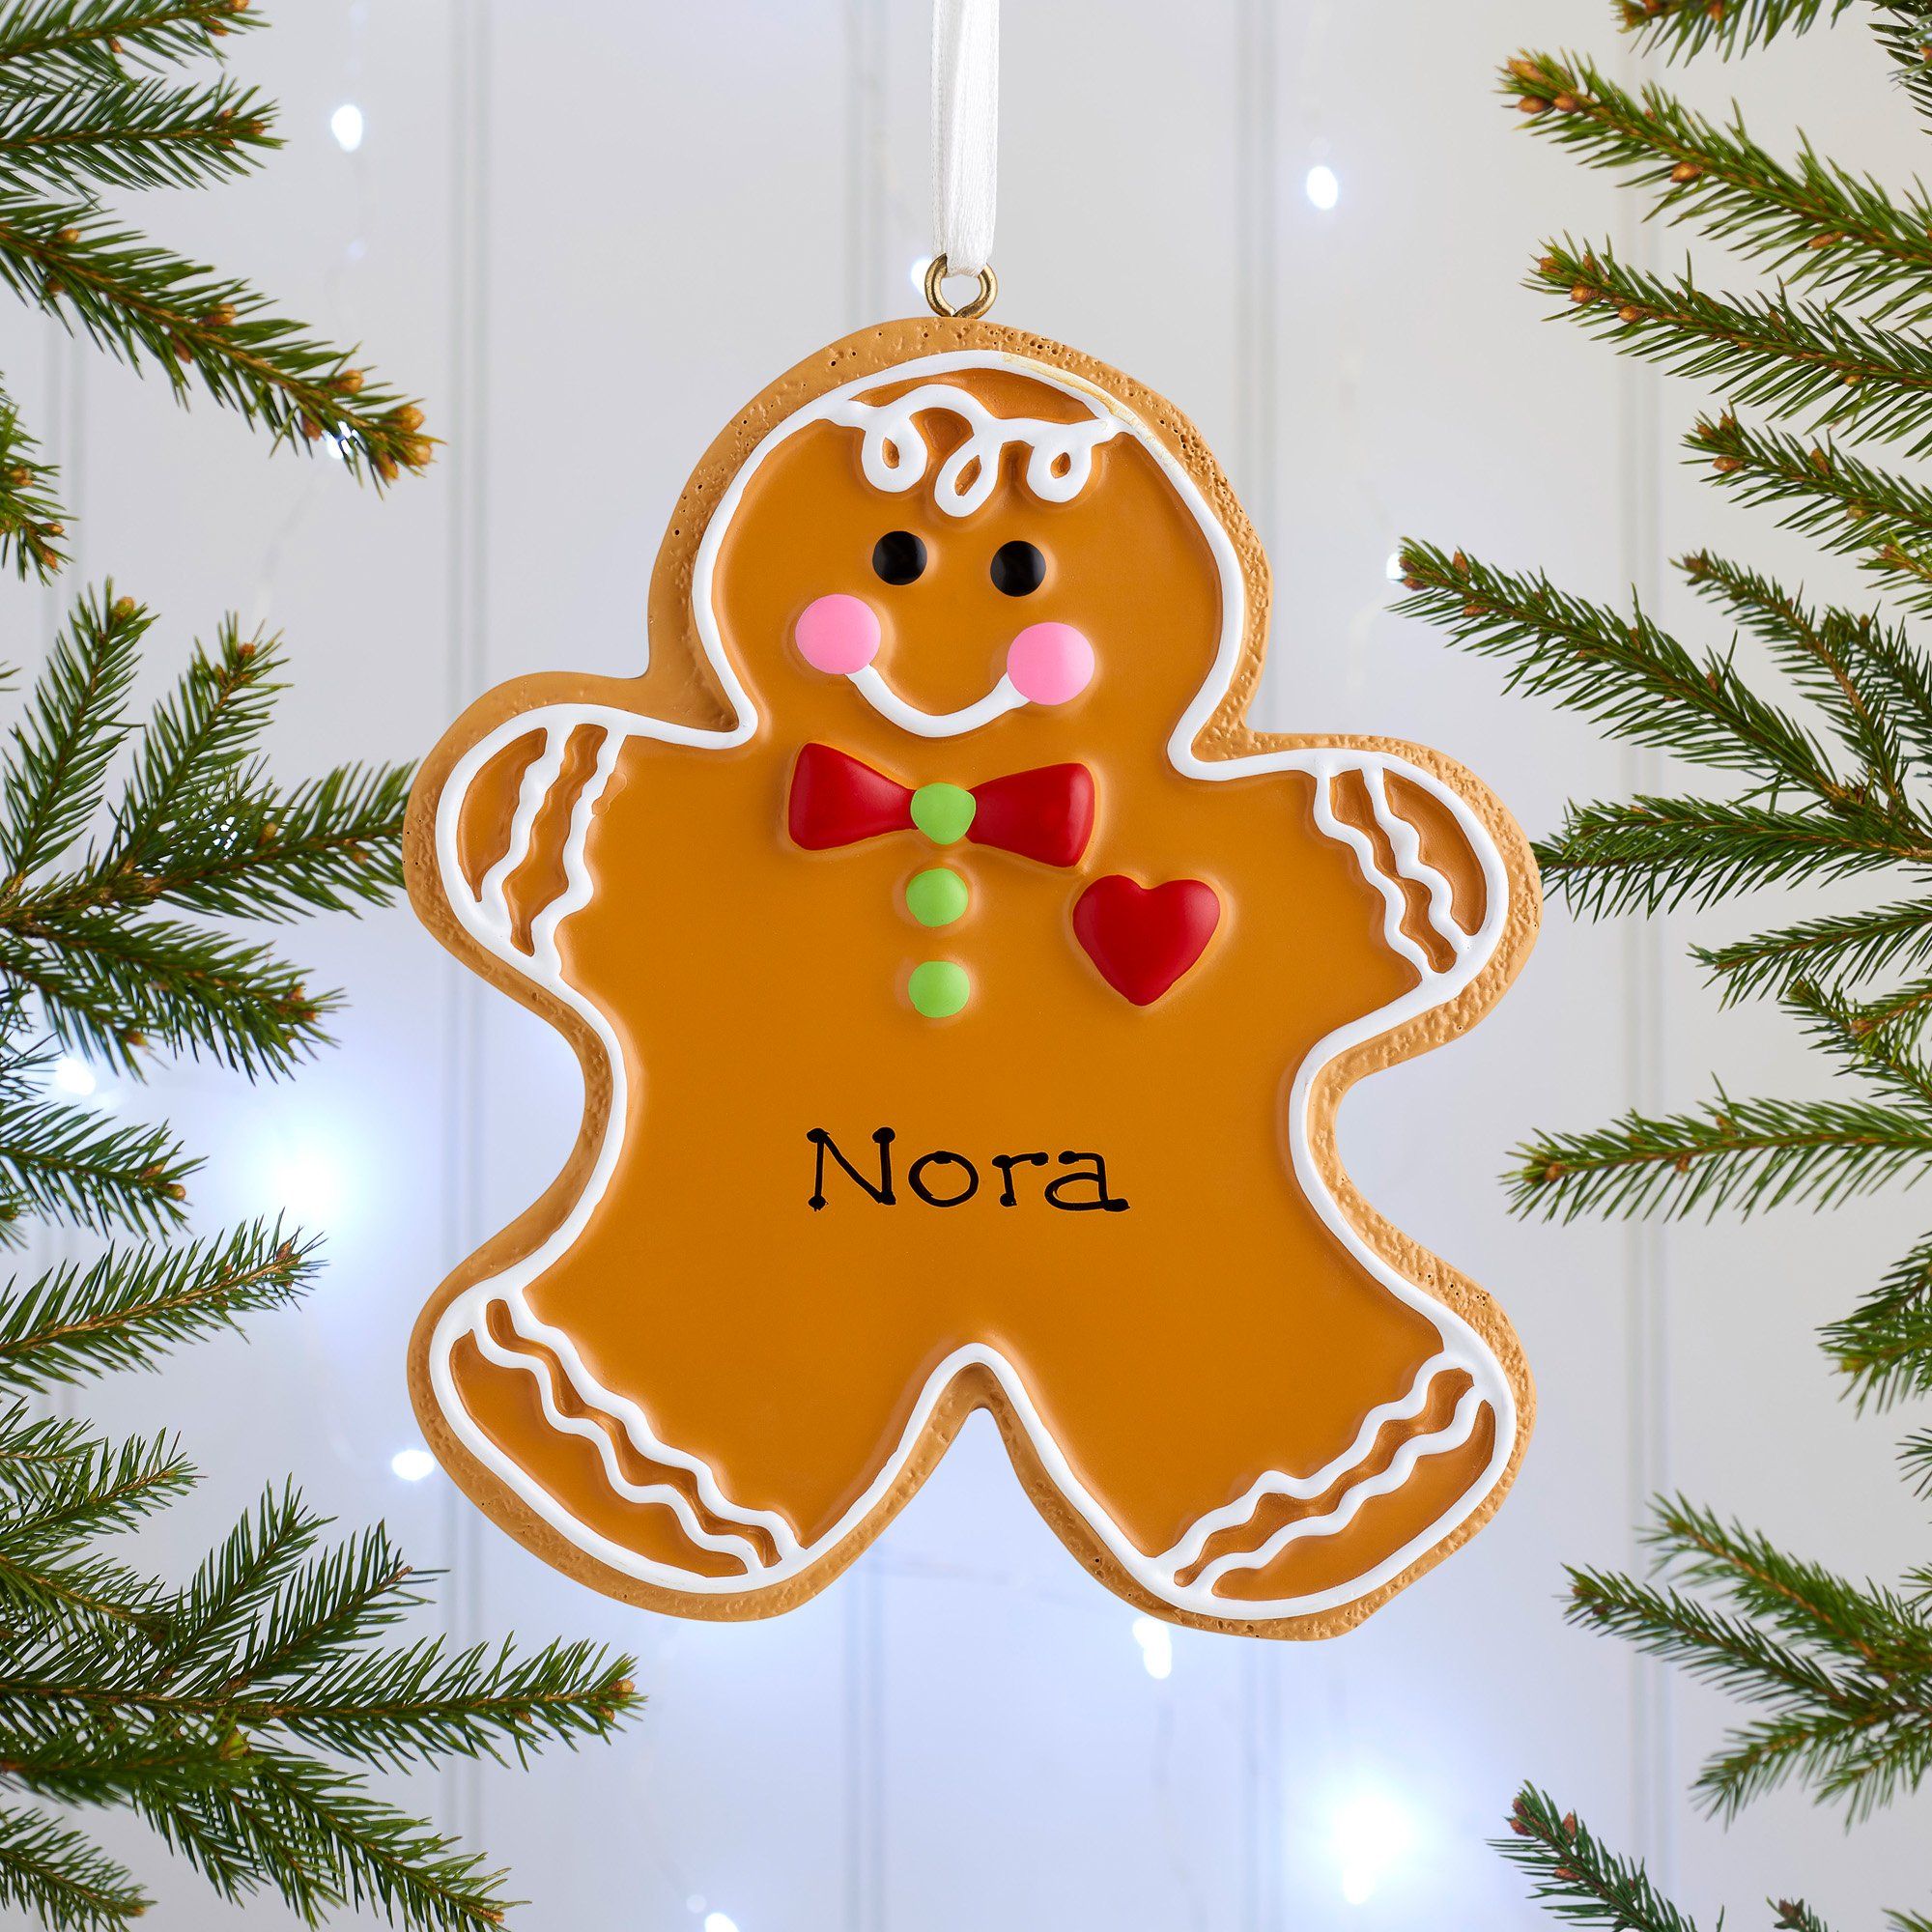 Christmas Ornament - Personalised Family Christmas Xmas Tree Decoration Ornament - Gingerbread Cookie